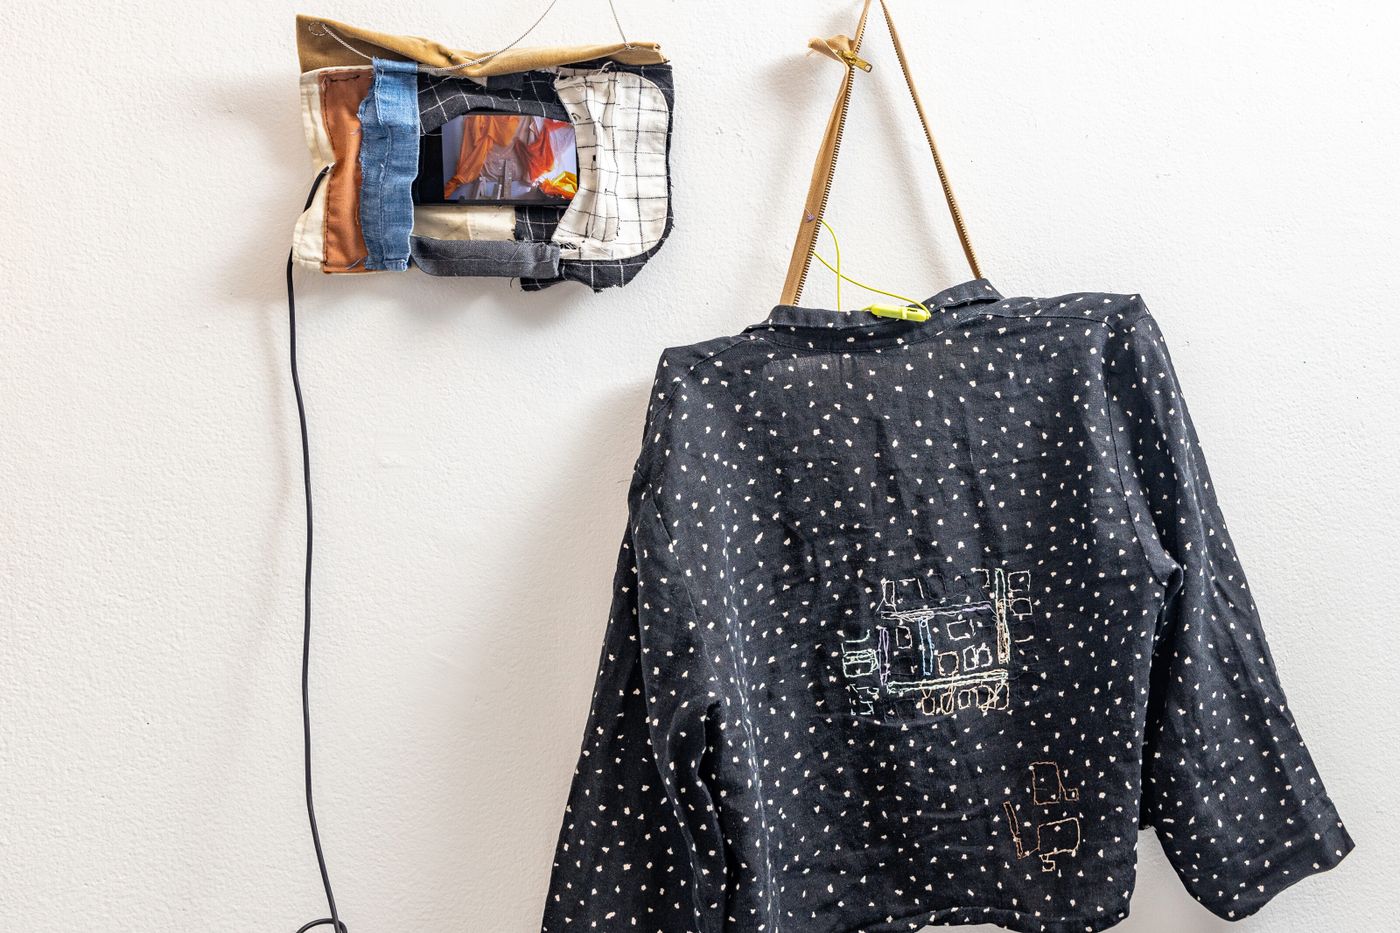 Anne Mailey with collaborators Katherine Yaochen Du and Goda Trakumaite, Conversations Between Cats and Clothes (detail), 2020-2022. Fabric, found objects, cellphones, video, stop motion animations, clothing, thread; 76 x 82 in. Video 4 min, 55 sec. Photo: Meghan Olson.